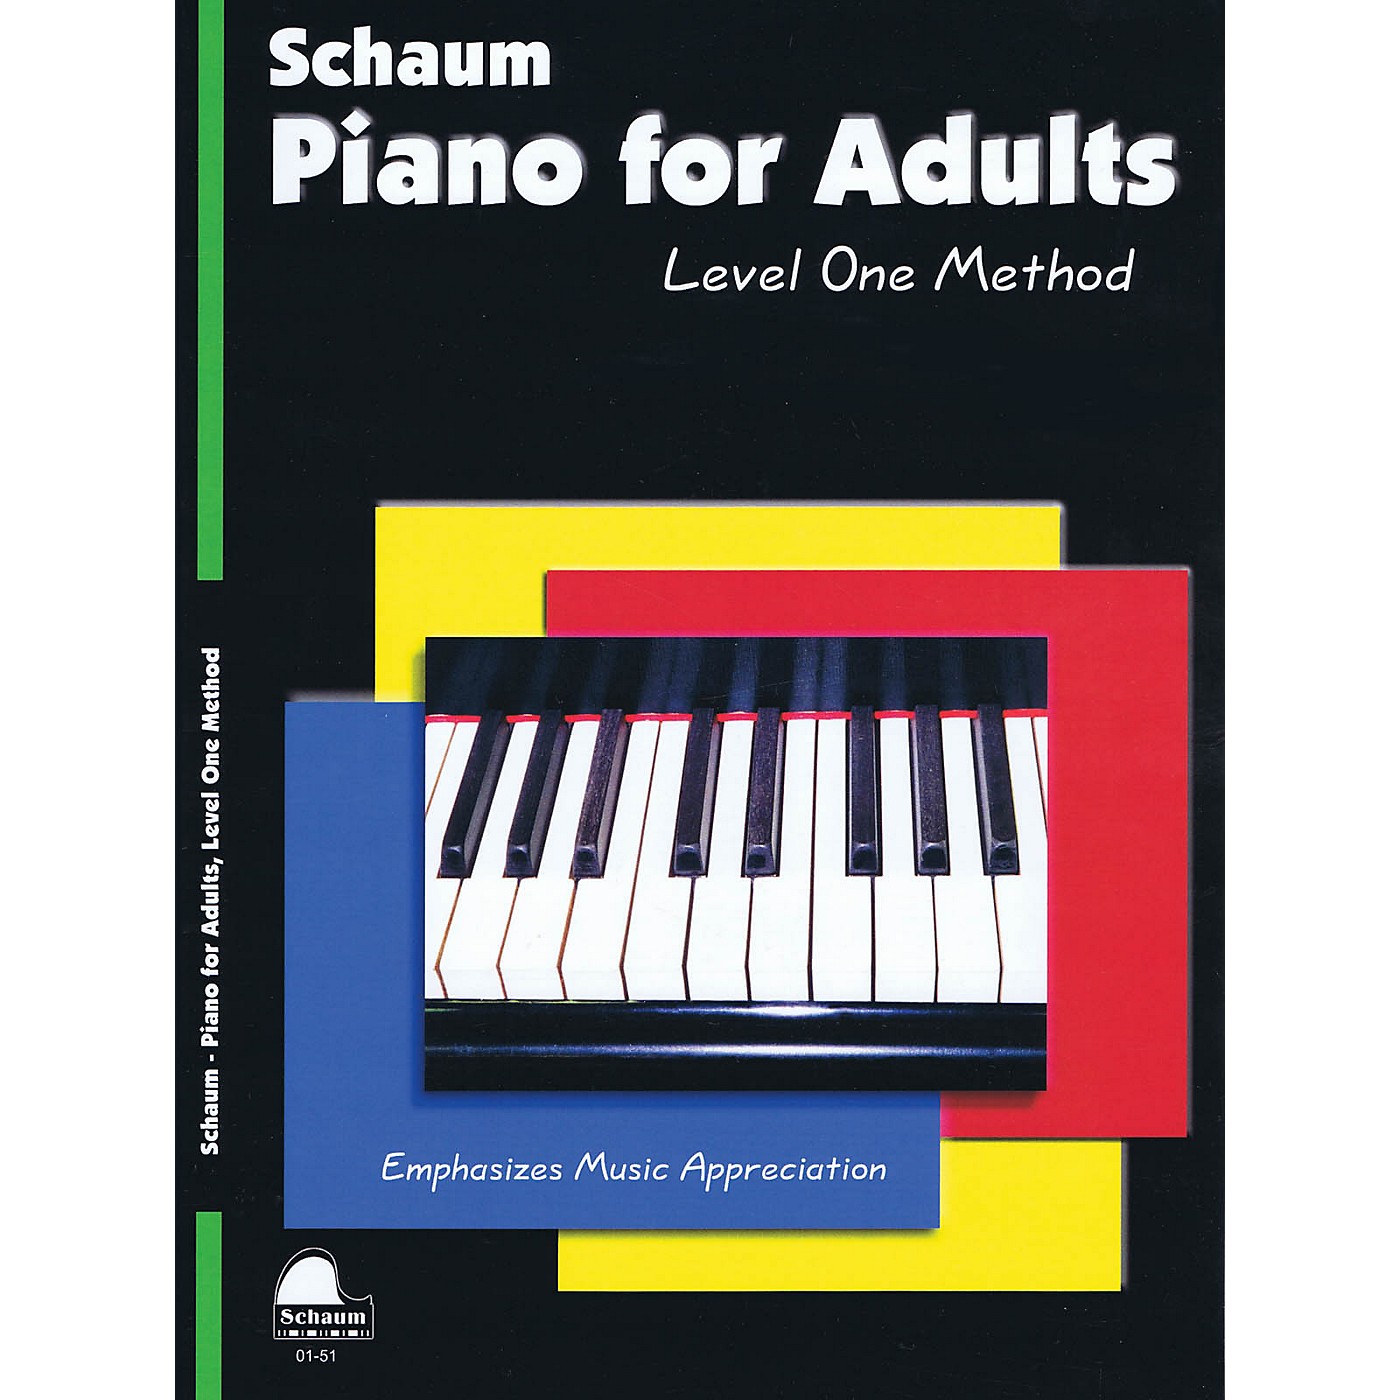 Schaum Piano for Adults (Level 1 Elem Level) Educational Piano Book by Wesley Schaum thumbnail